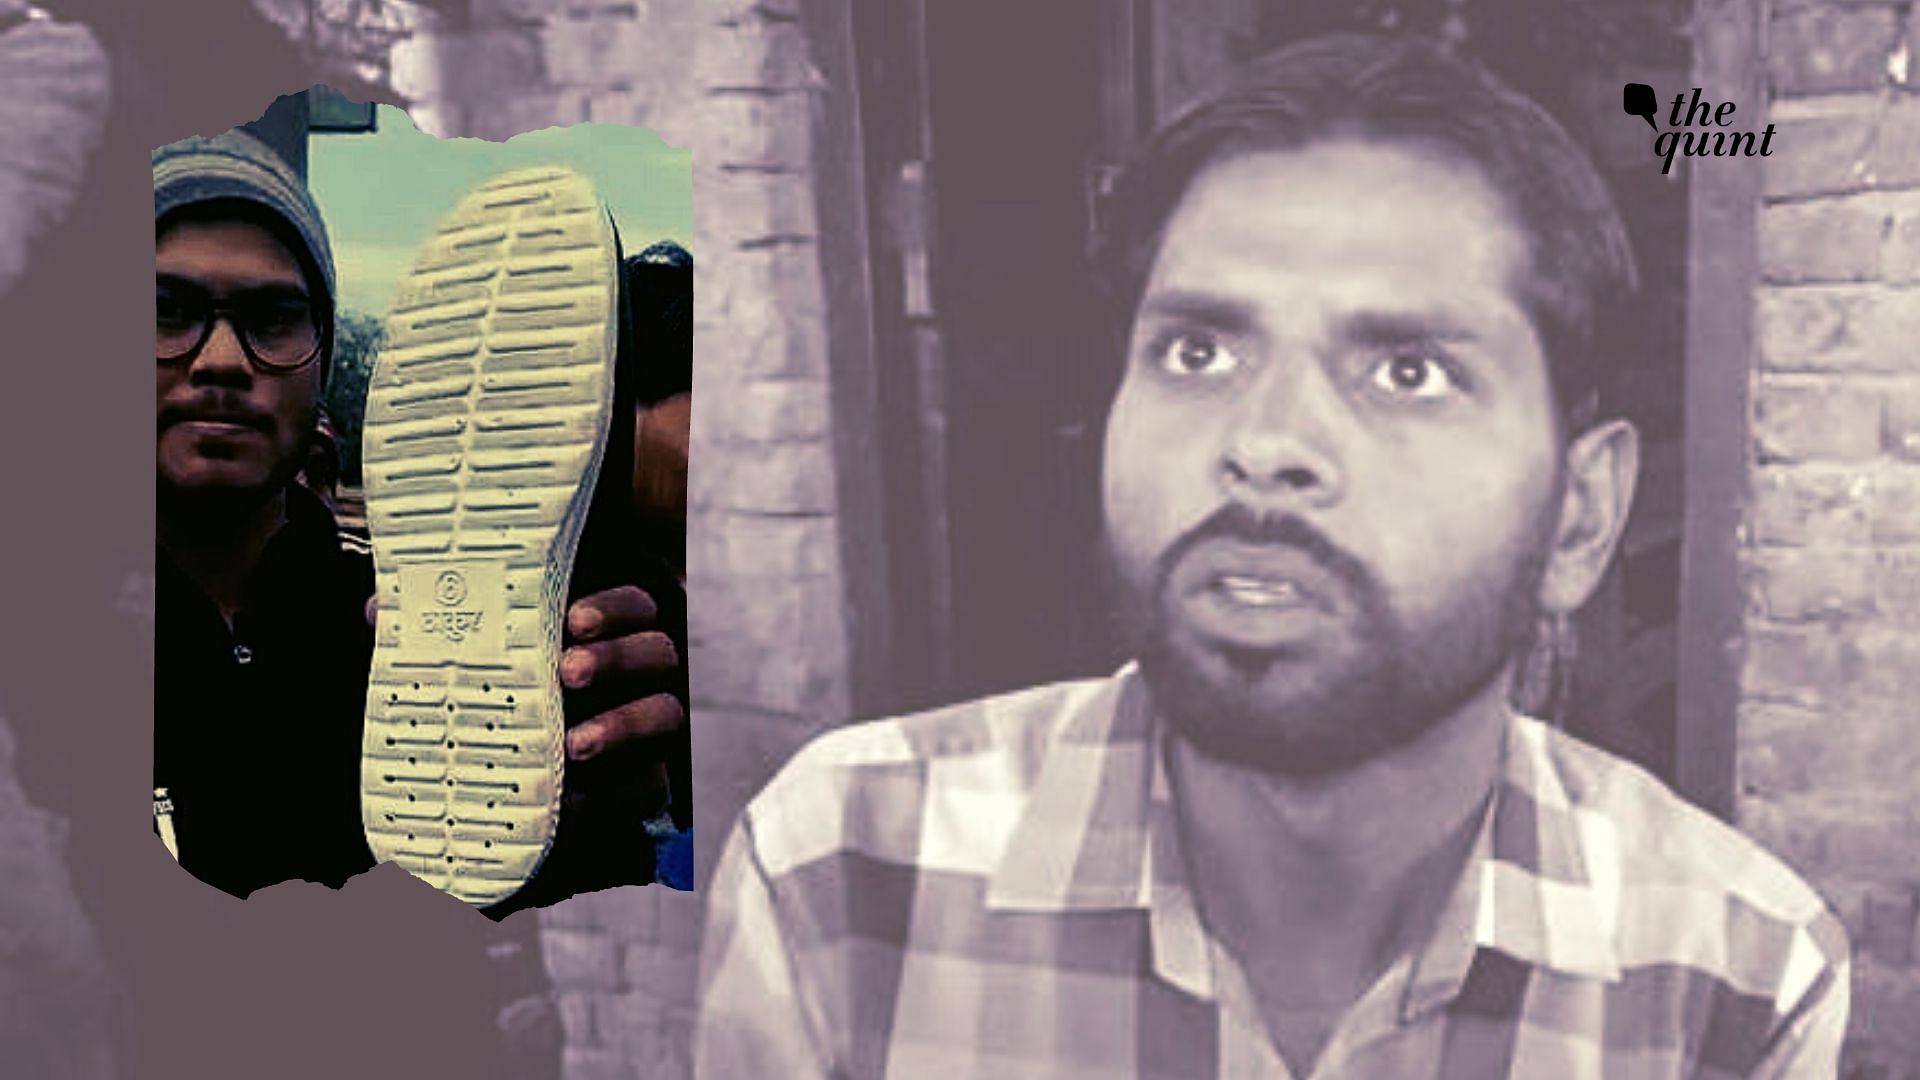 Nasir, the Muslim shopkeeper in Bulandshahr, said, “Had I known selling those shoes would create so much problems, I would have never done it.”